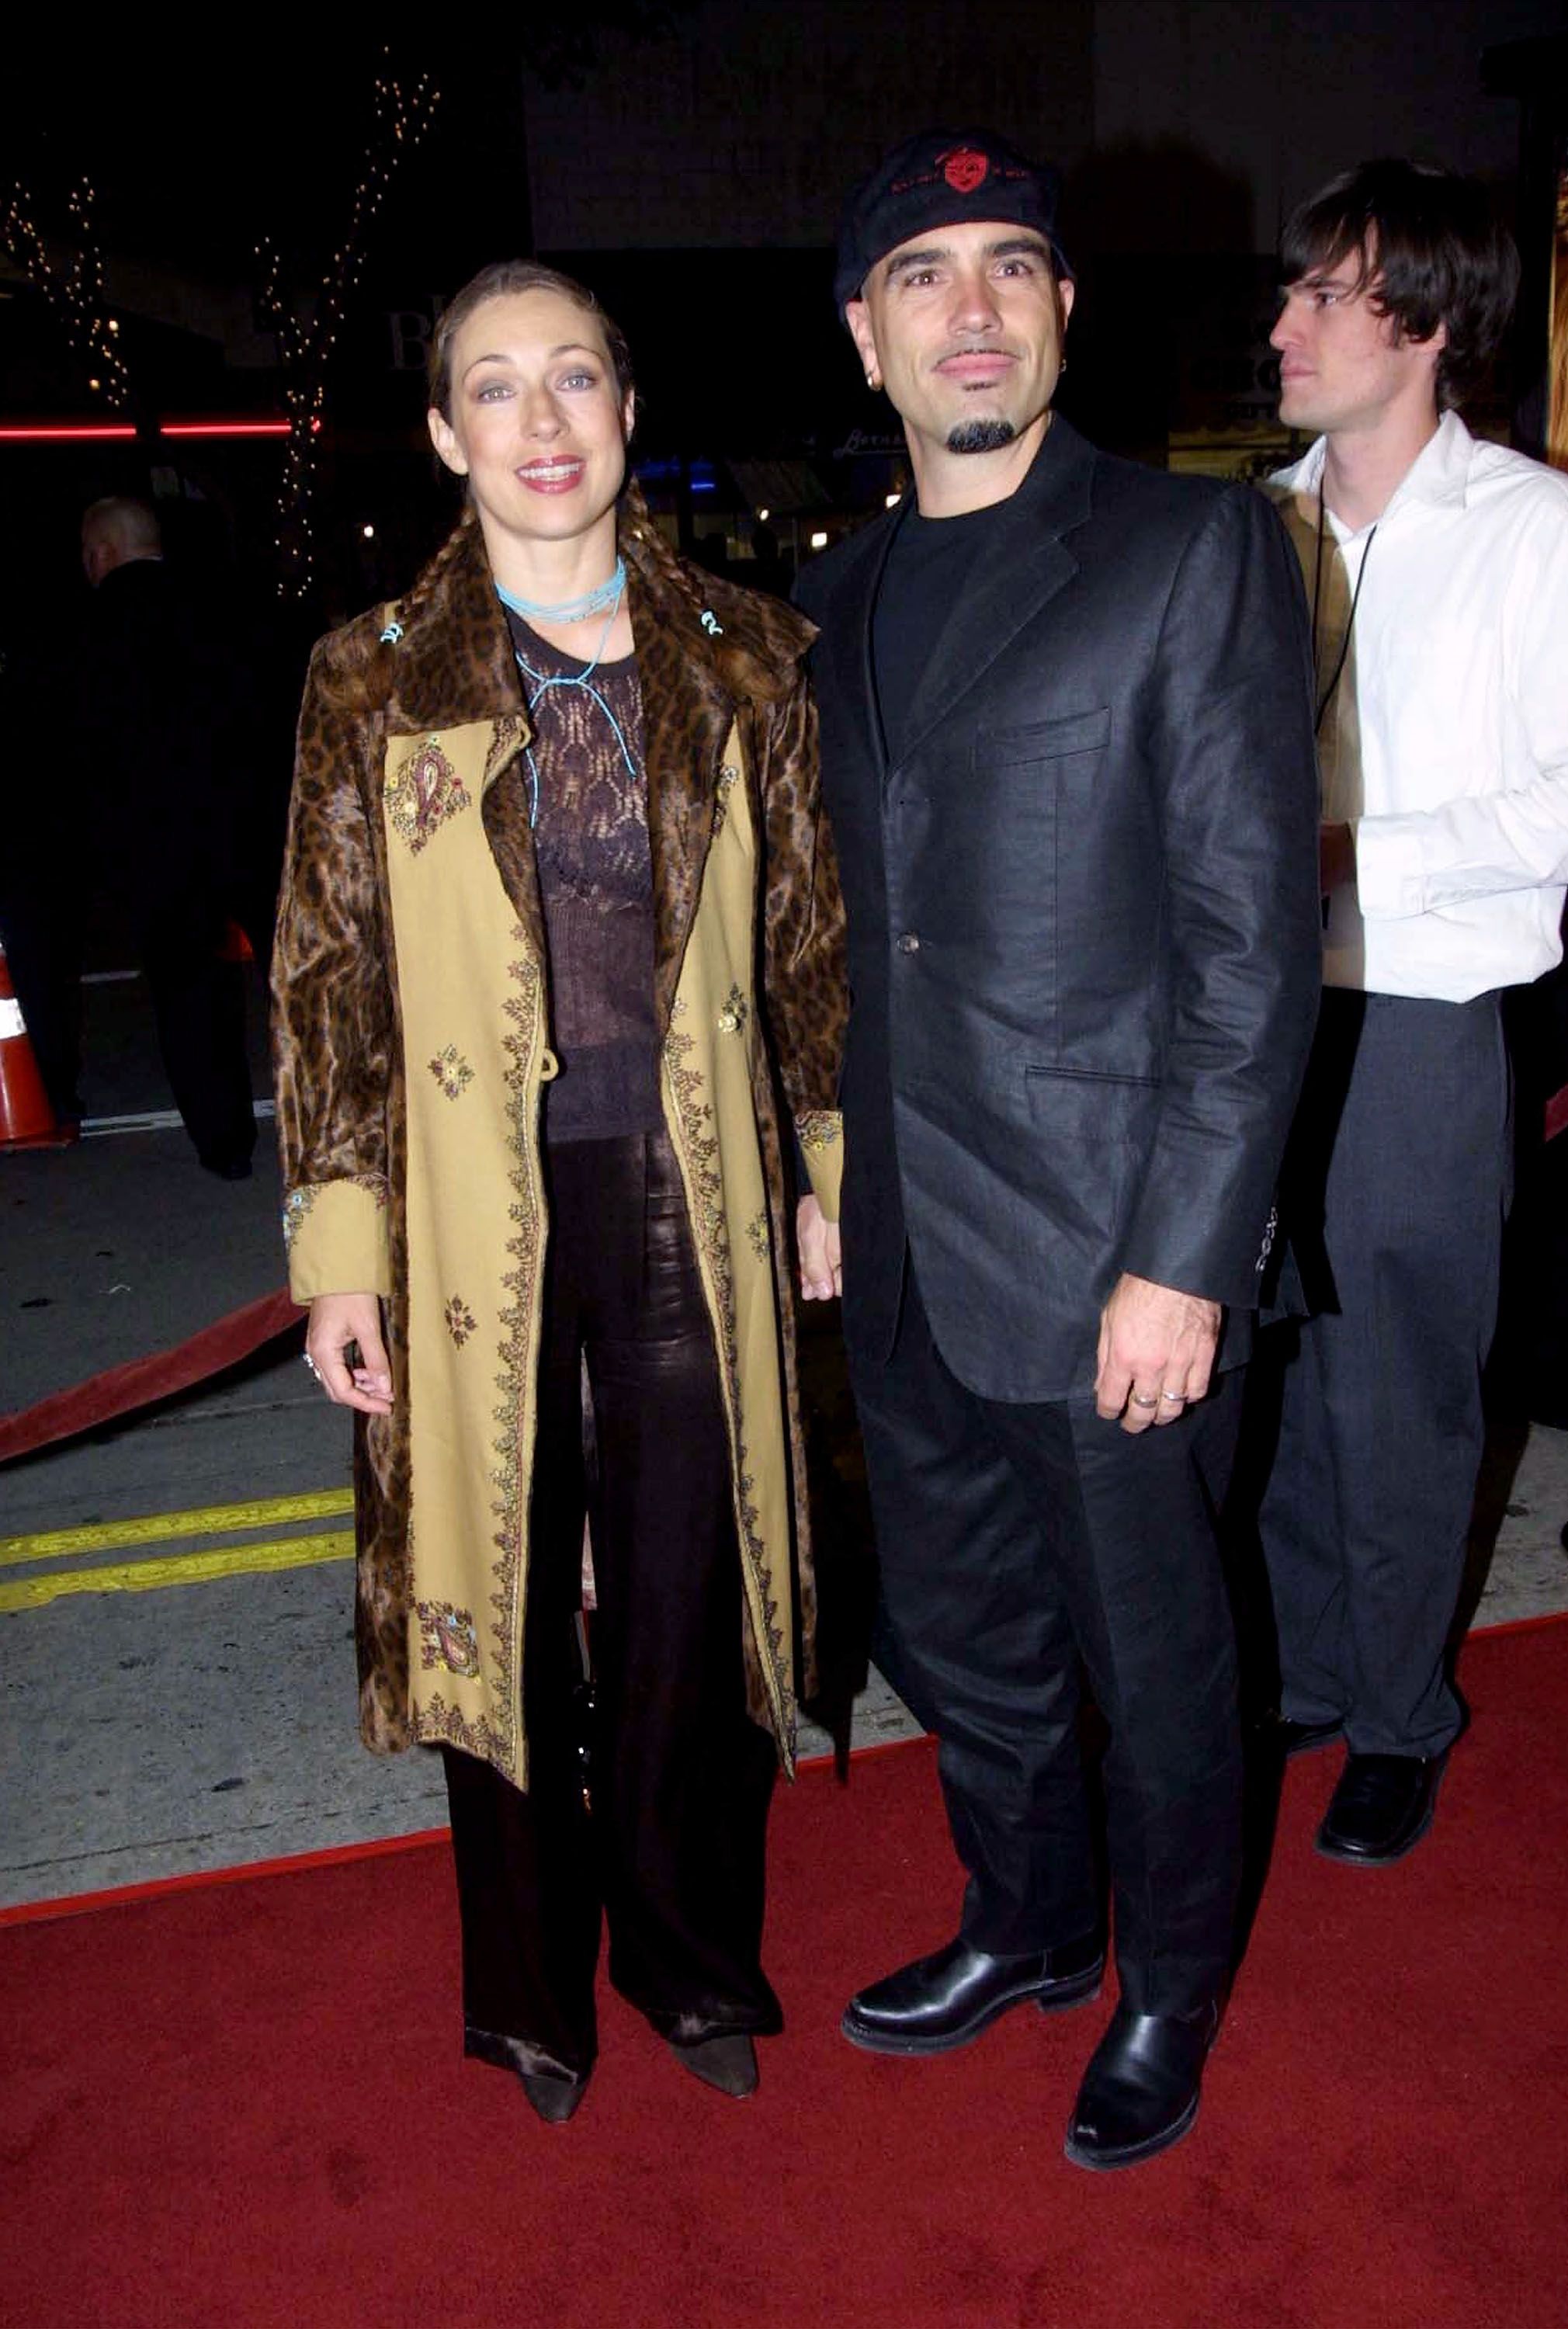 Alex Kingston and Florian Haertel during the premiere of "Kate & Leopold" December 11, 2001 in Los Angeles, CA. | Source: Getty Images